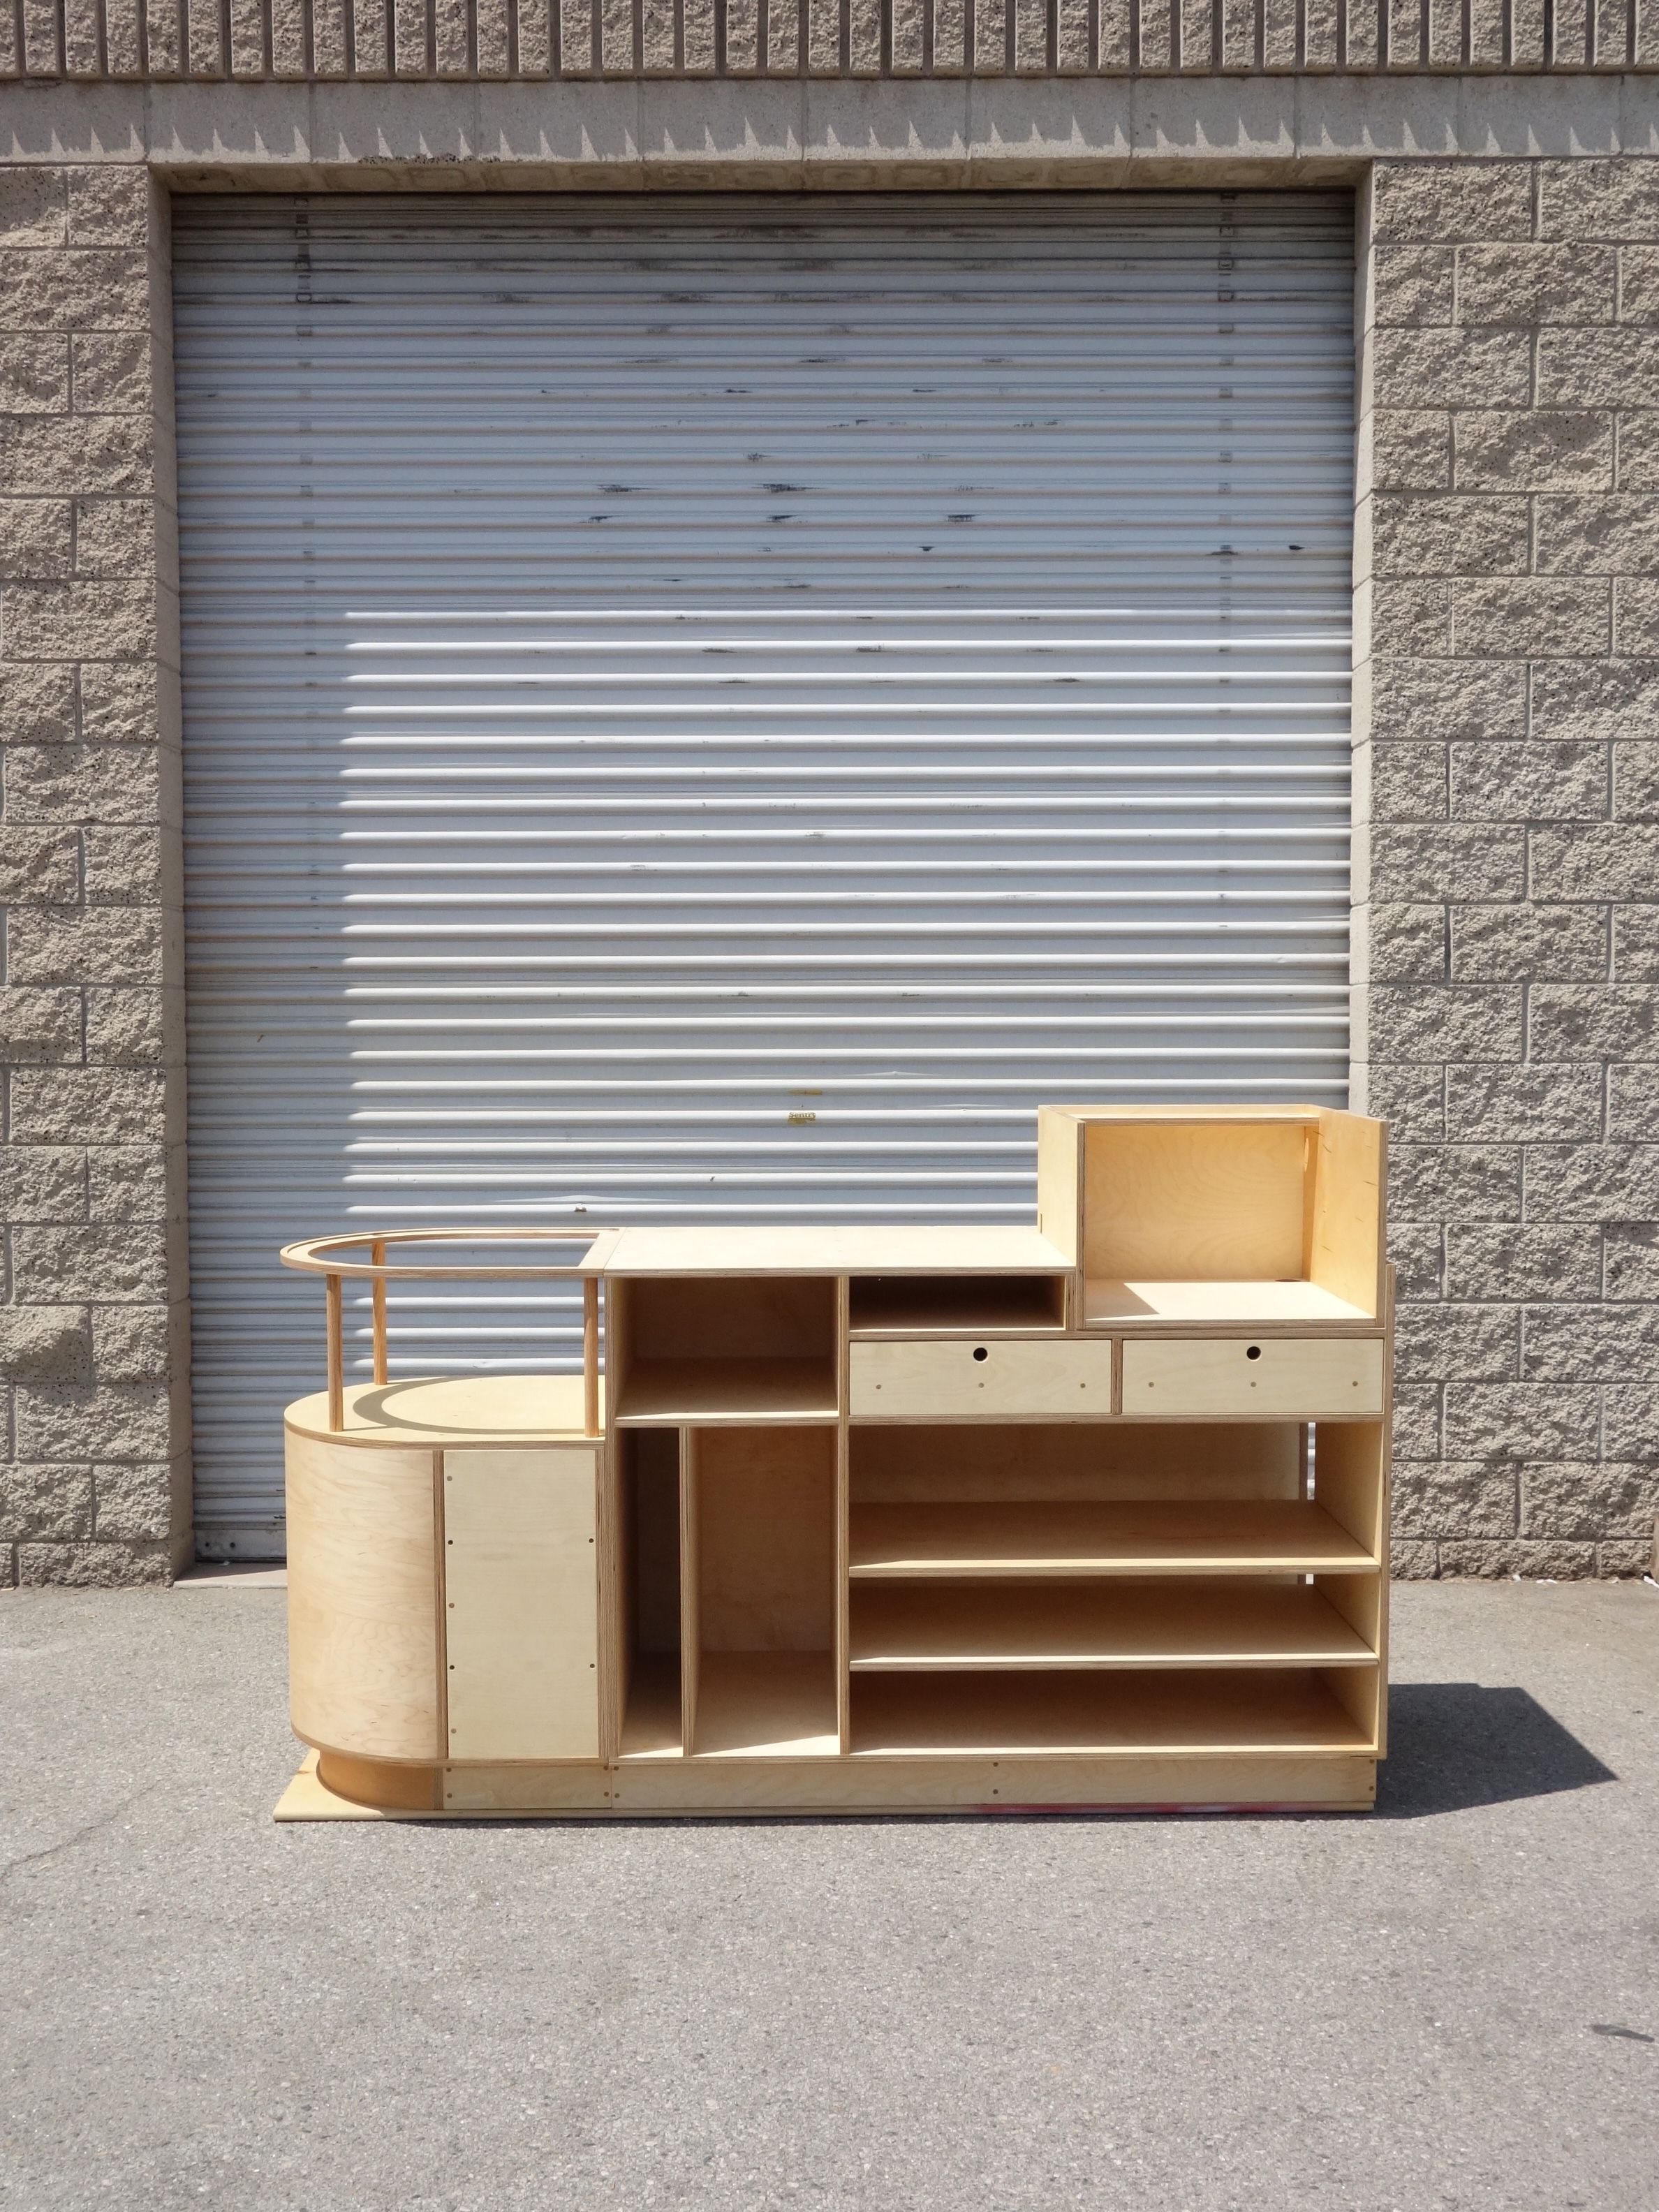  Storage Display - Landscape Products product image 0